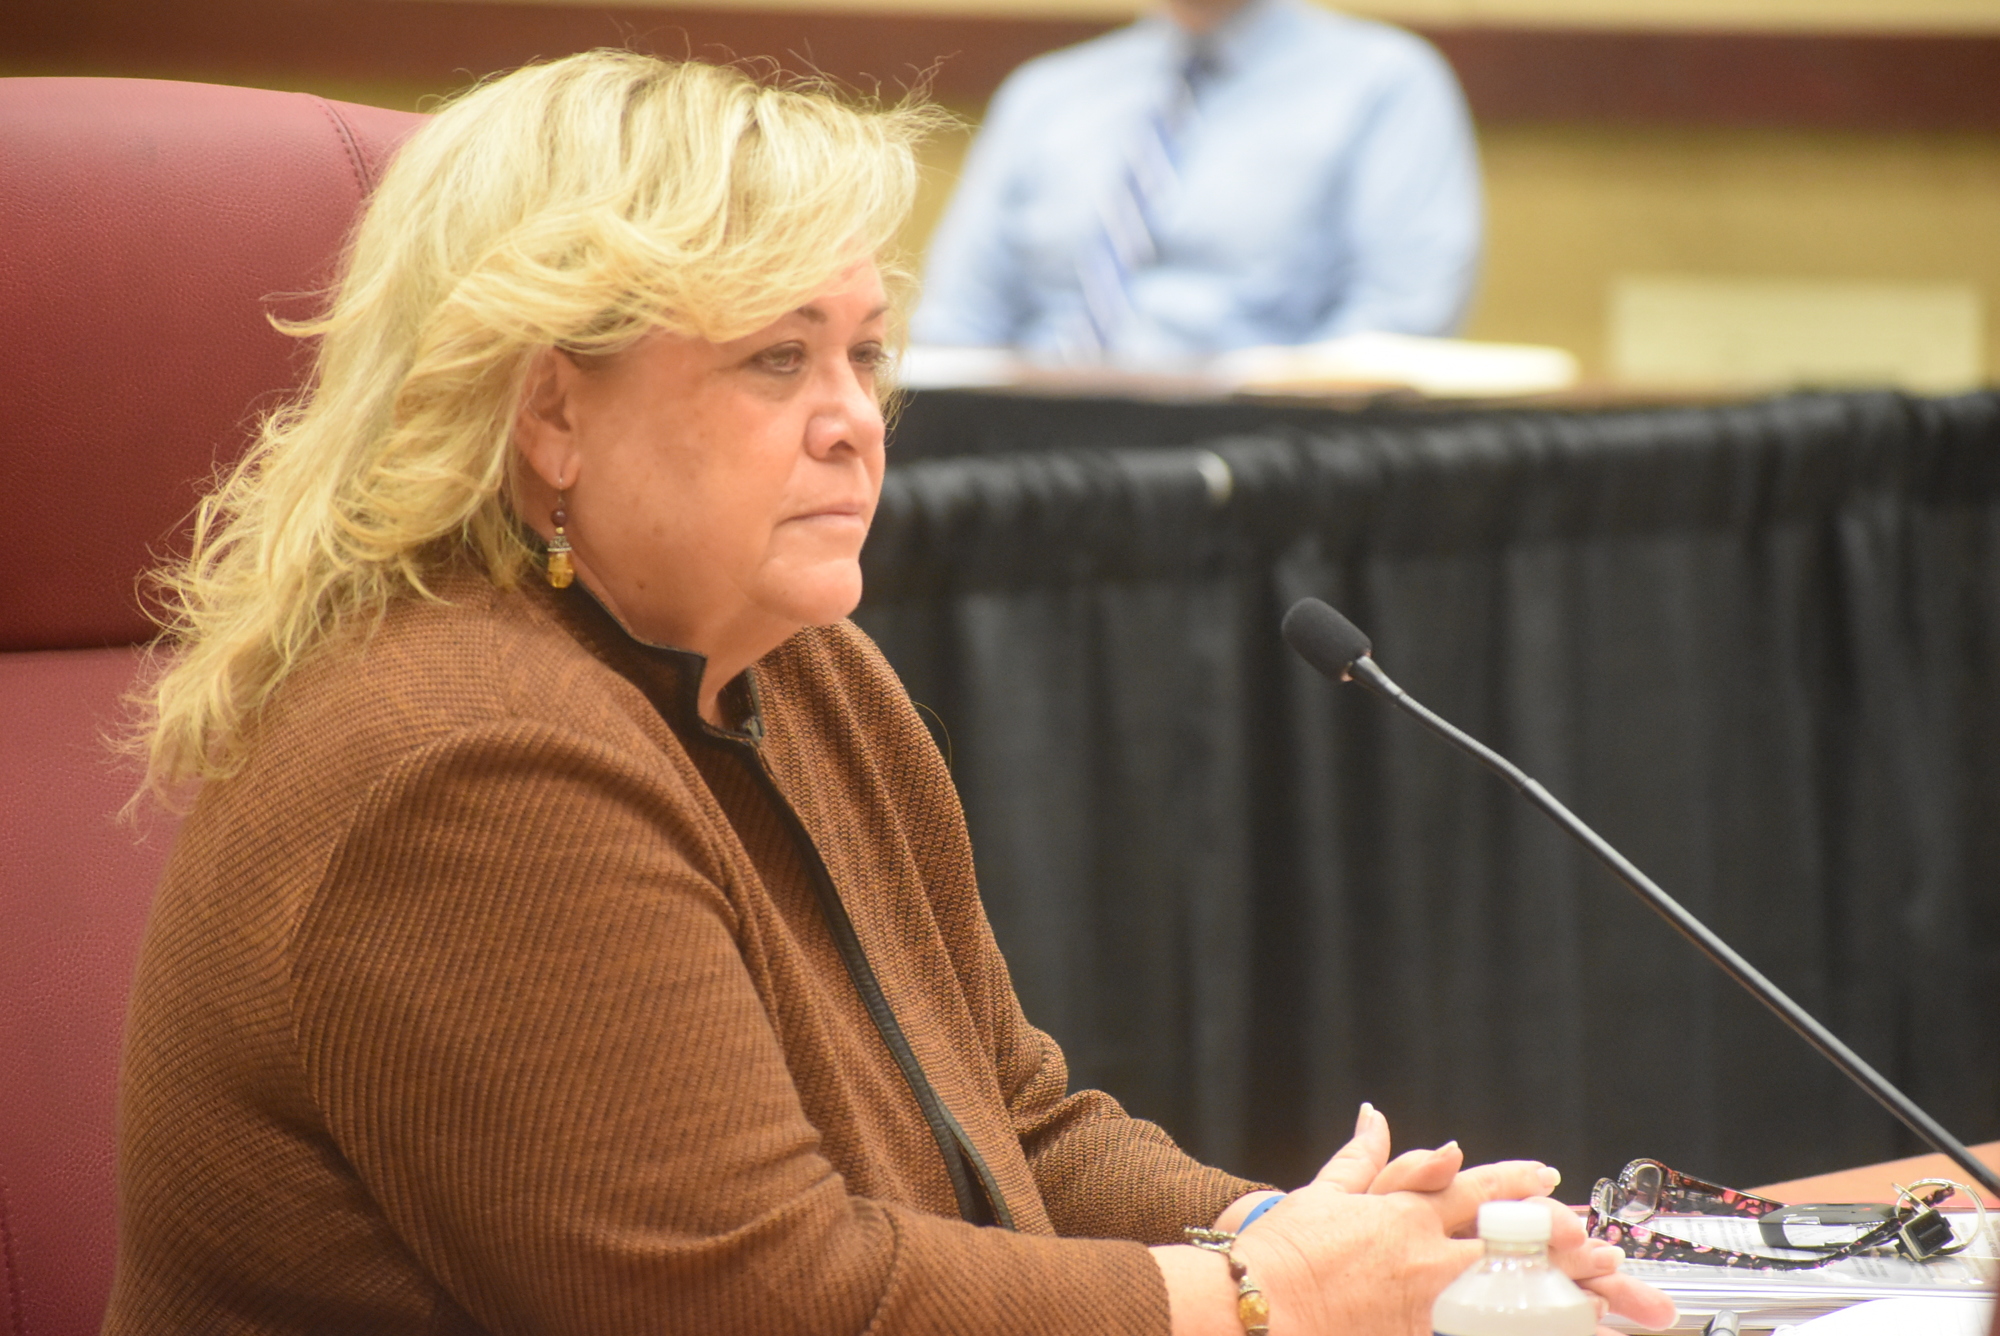 Manatee County Administrator Cheri Coryea's attorney and Manatee County Attorney William Clague will negotiate a separation agreement at the direction of county commissioners.